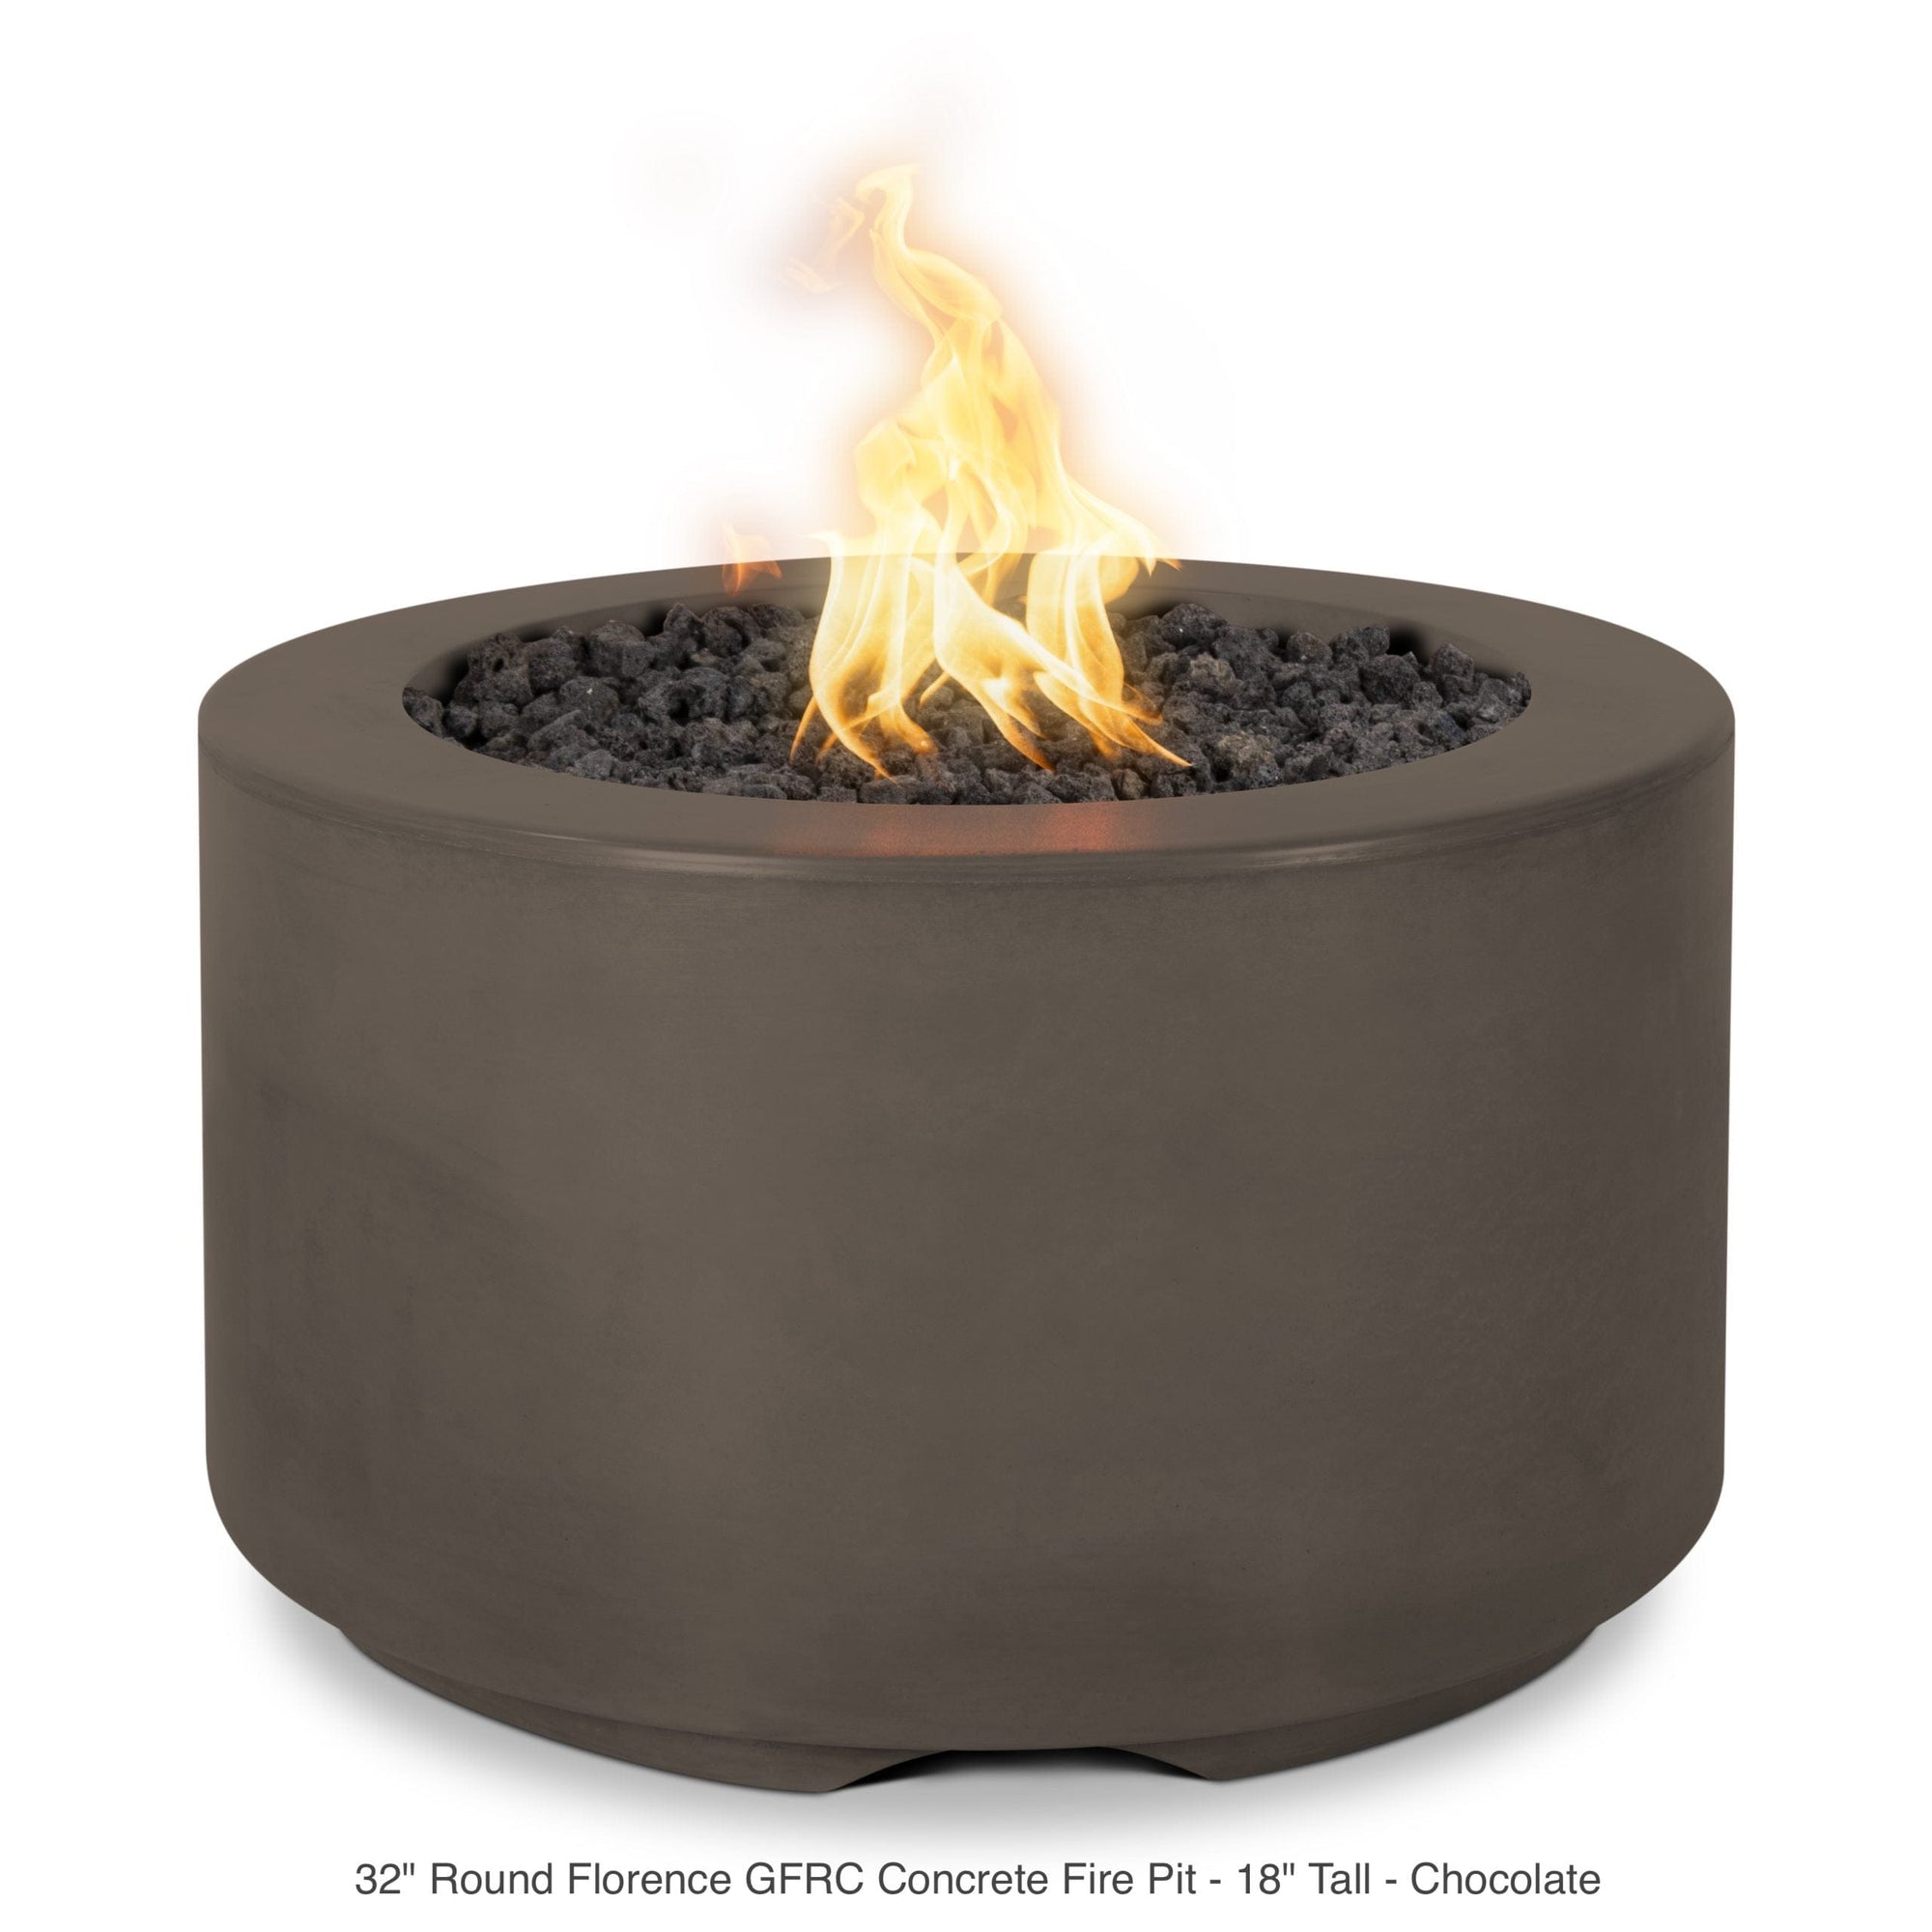 The Outdoor Plus Fire Features The Outdoor Plus 32" Round Florence GFRC Concrete Fire Pit - 18" Tall / OPT-FL3218, OPT-FL3218FSML, OPT-FL3218FSEN, OPT-FL3218E12V, OPT-FL3218EKIT